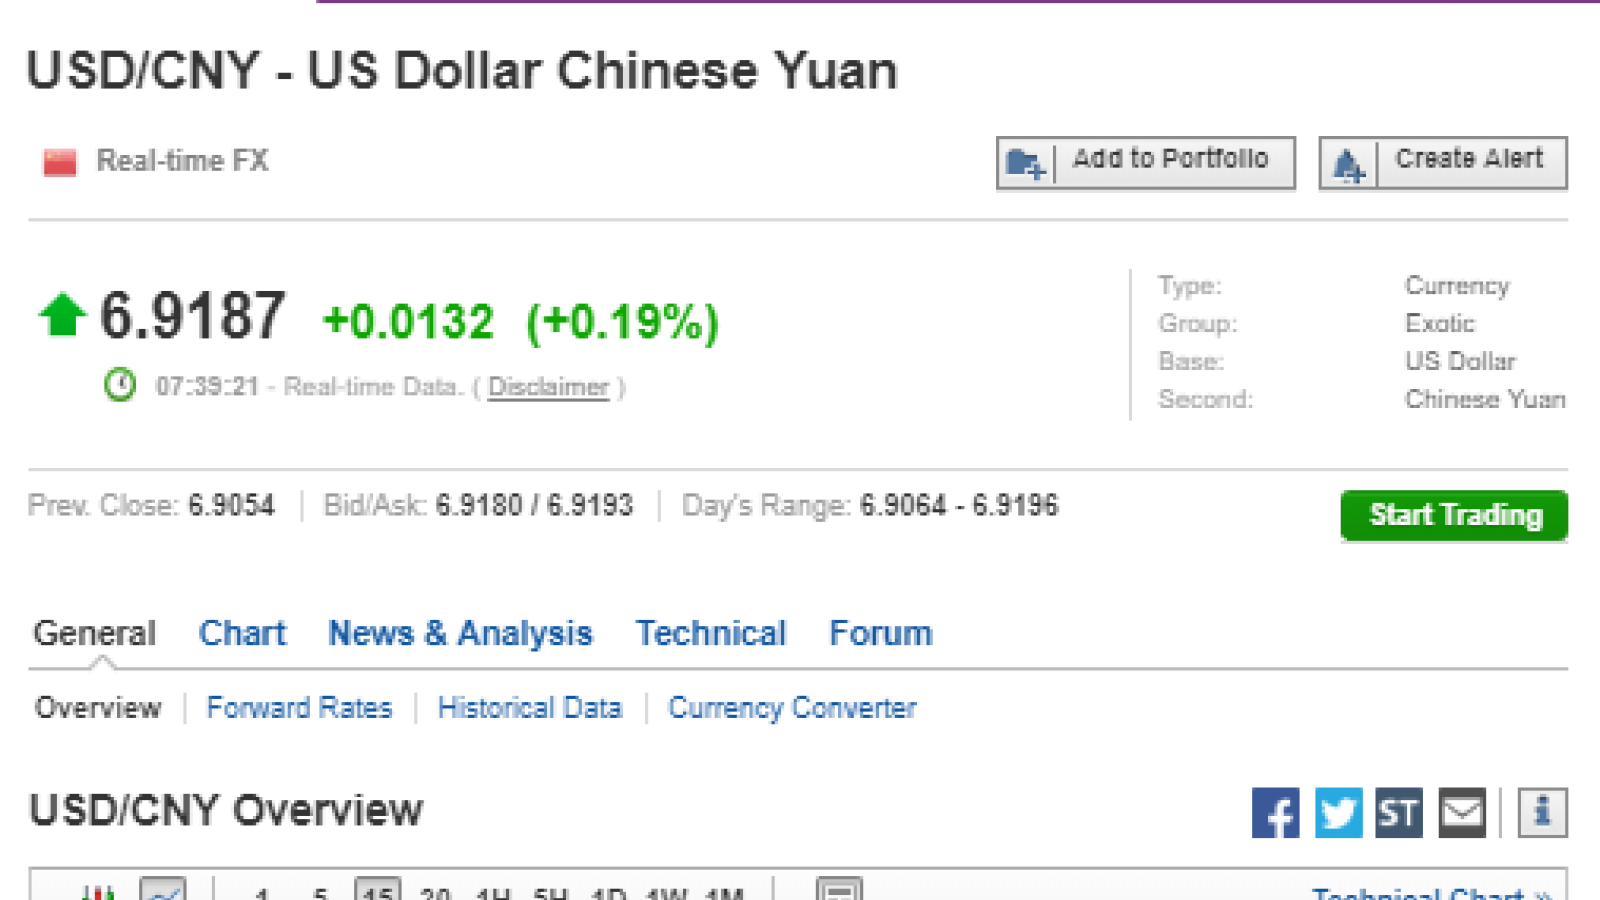 https://www.investing.com/currencies/usd-cny